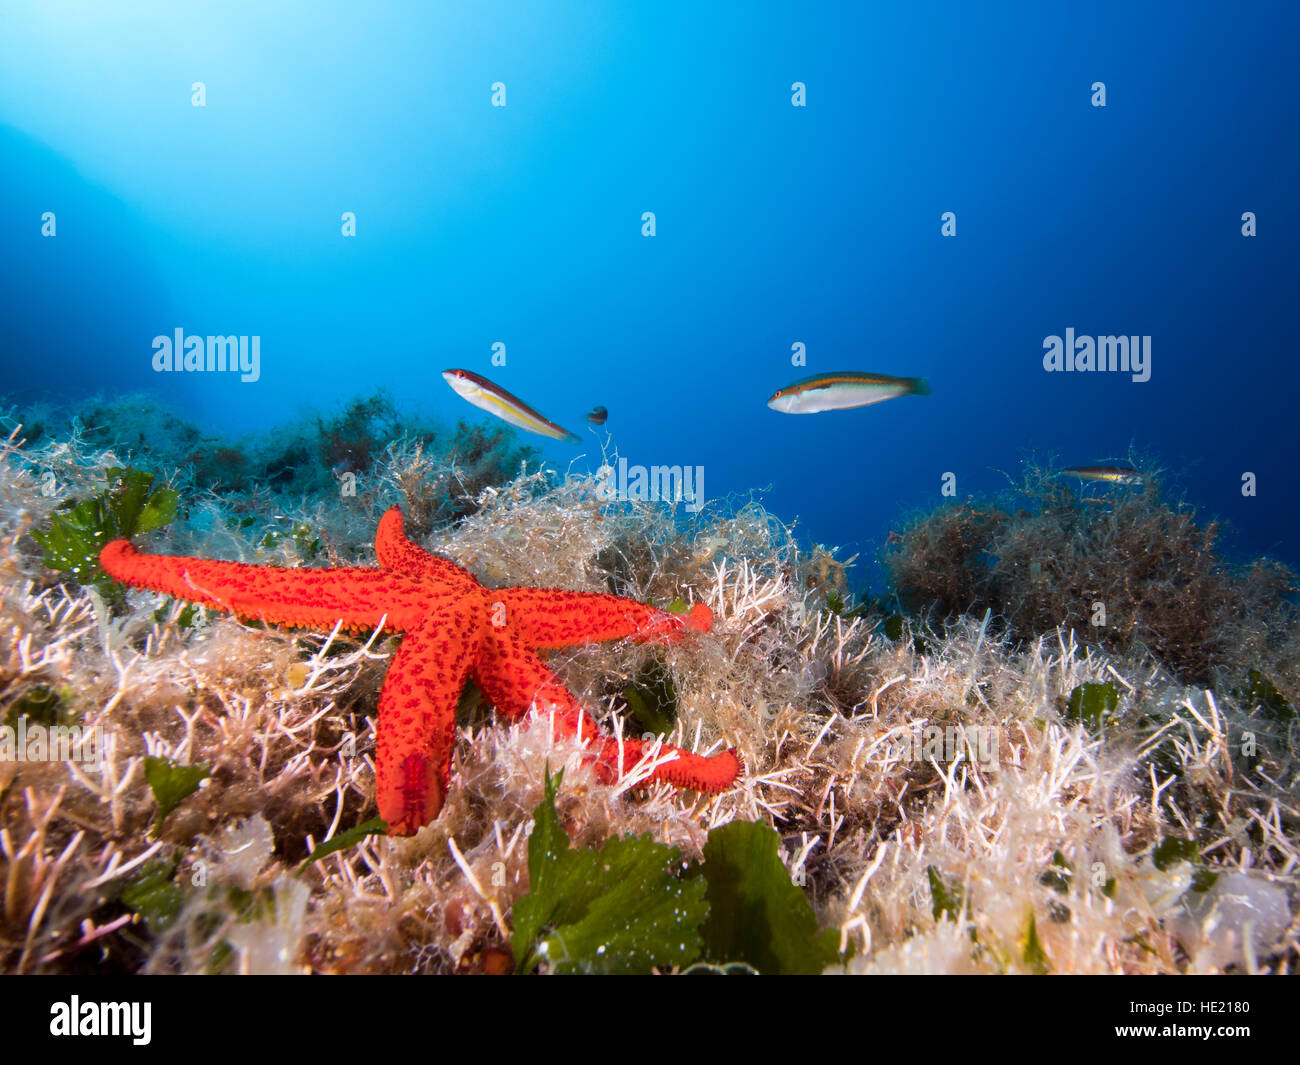 Red star fish lying on the sea bodom with rainbow wrasses against a blue background Stock Photo